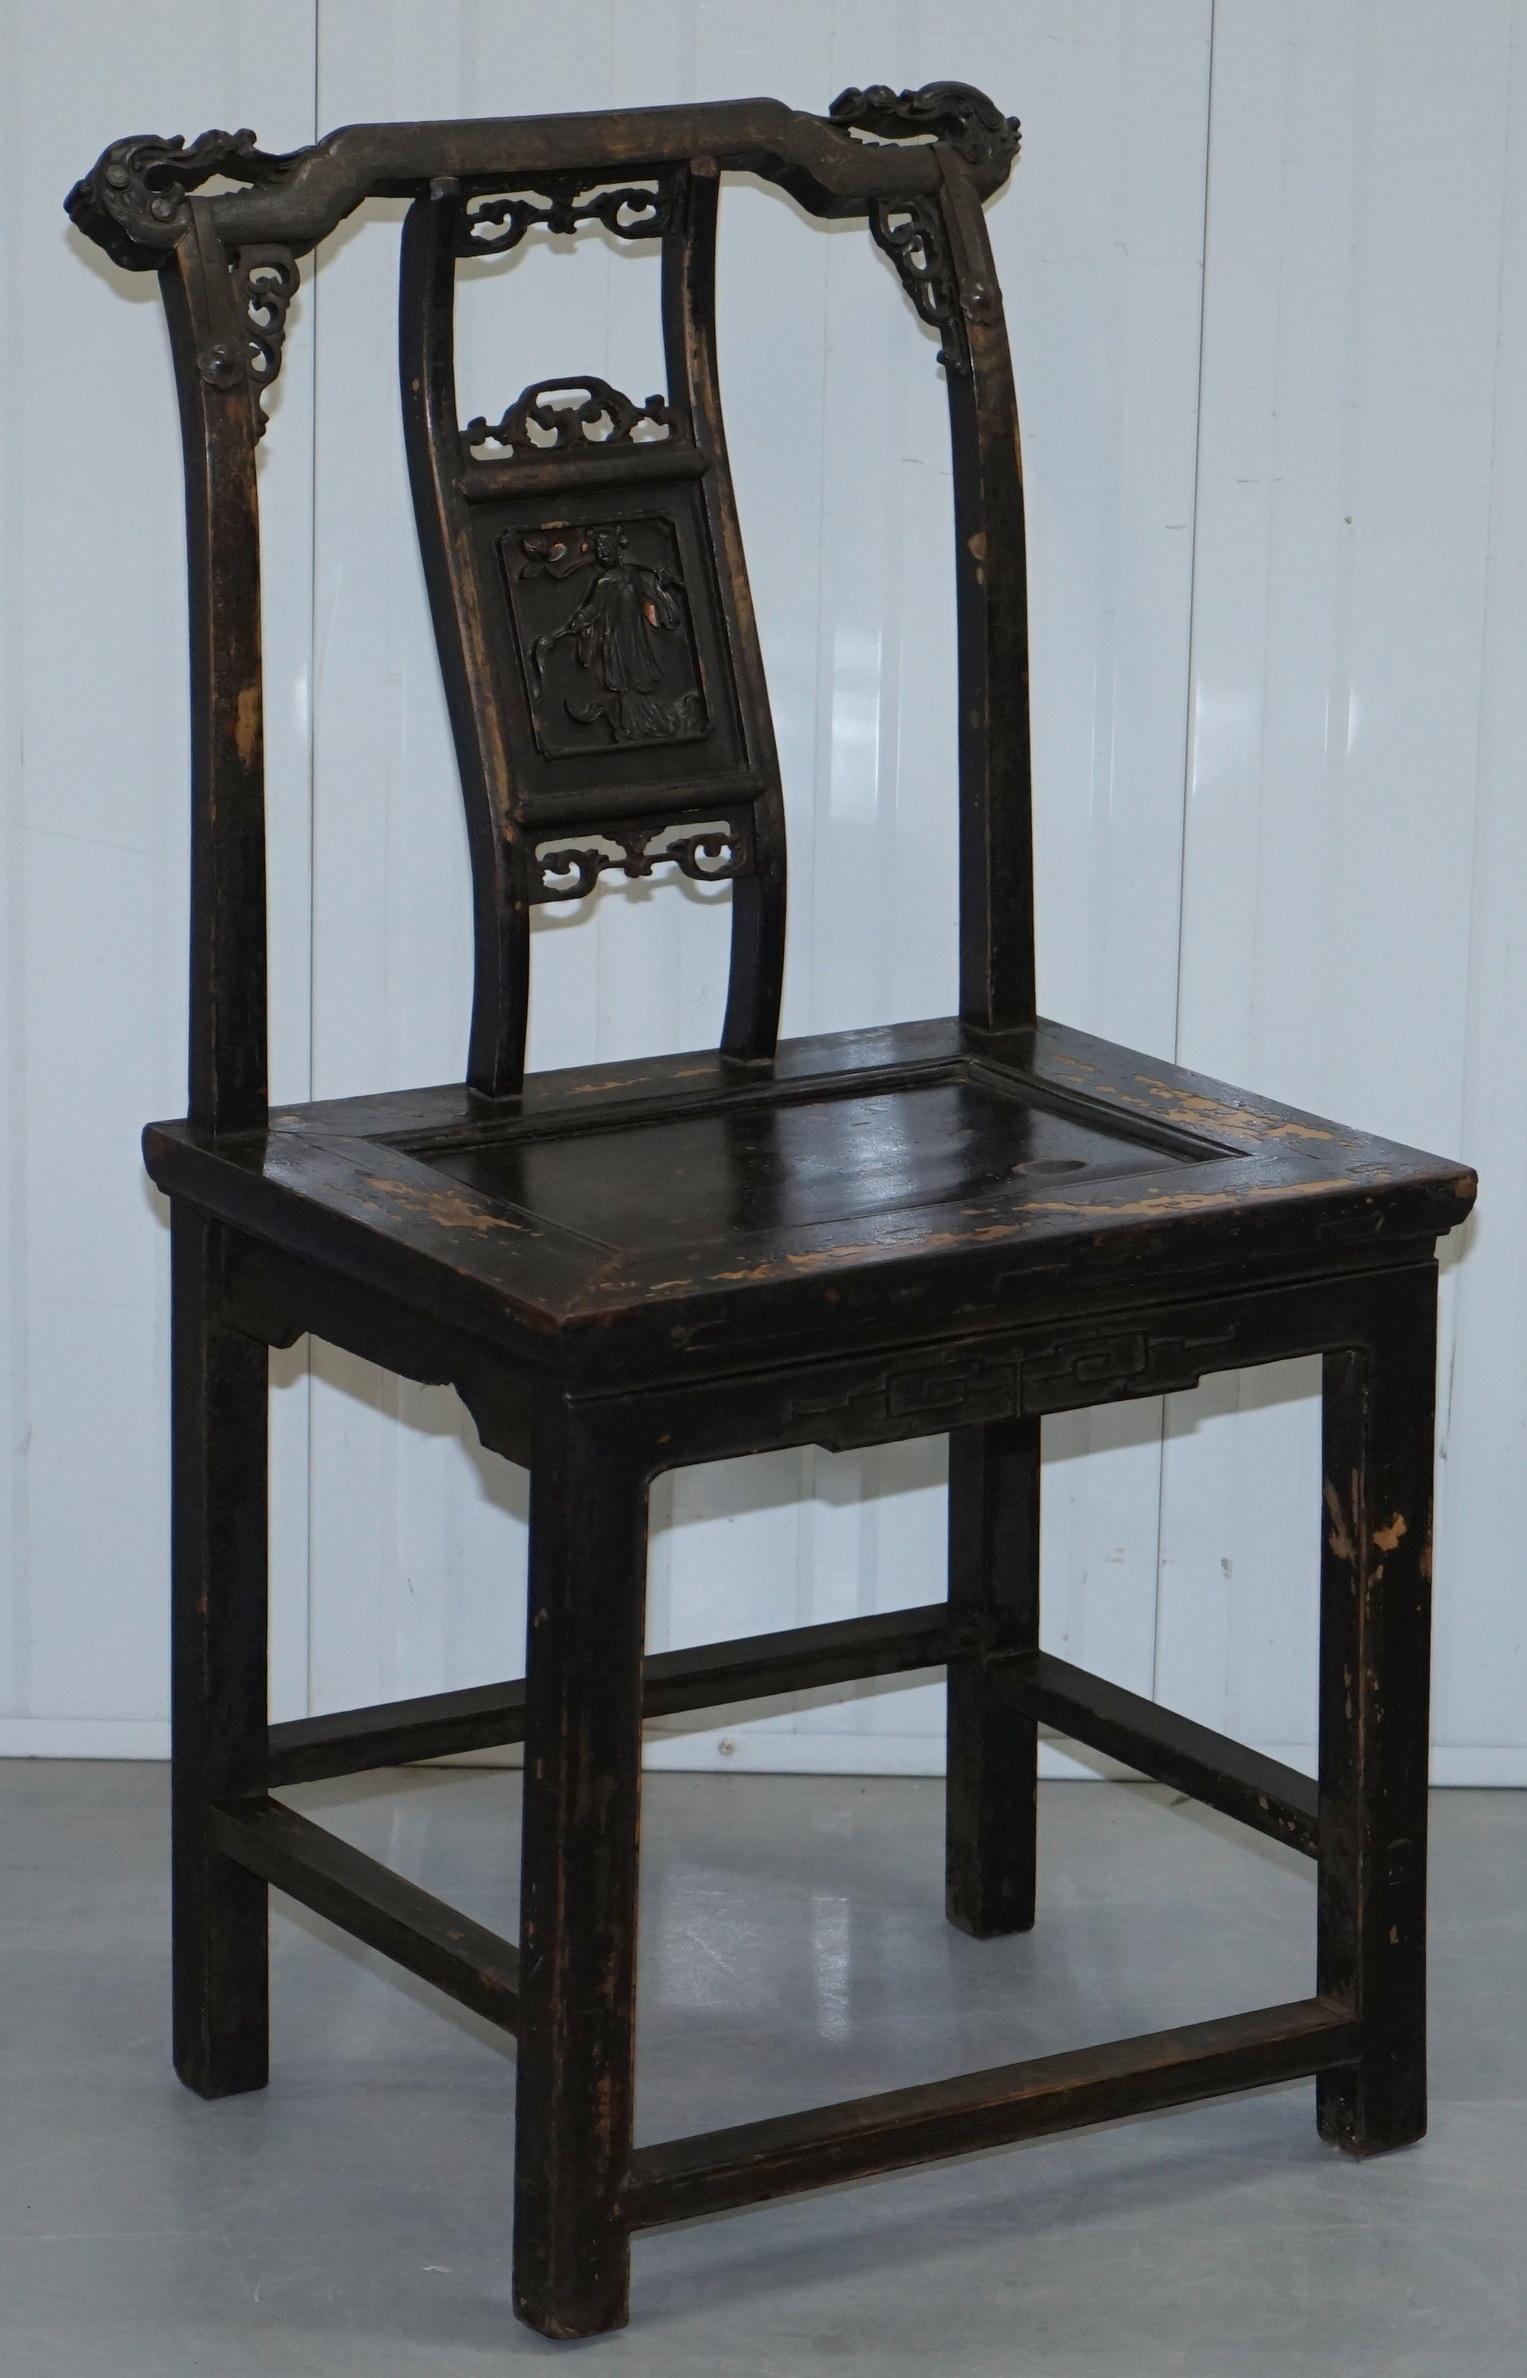 We are delighted to offer for auction this lovely set of original Qing dynasty hardwood carved barn find oriental Throne chairs with original ebonized distressed paint.

These chairs are very rare, original circa 1880, the distressing to the